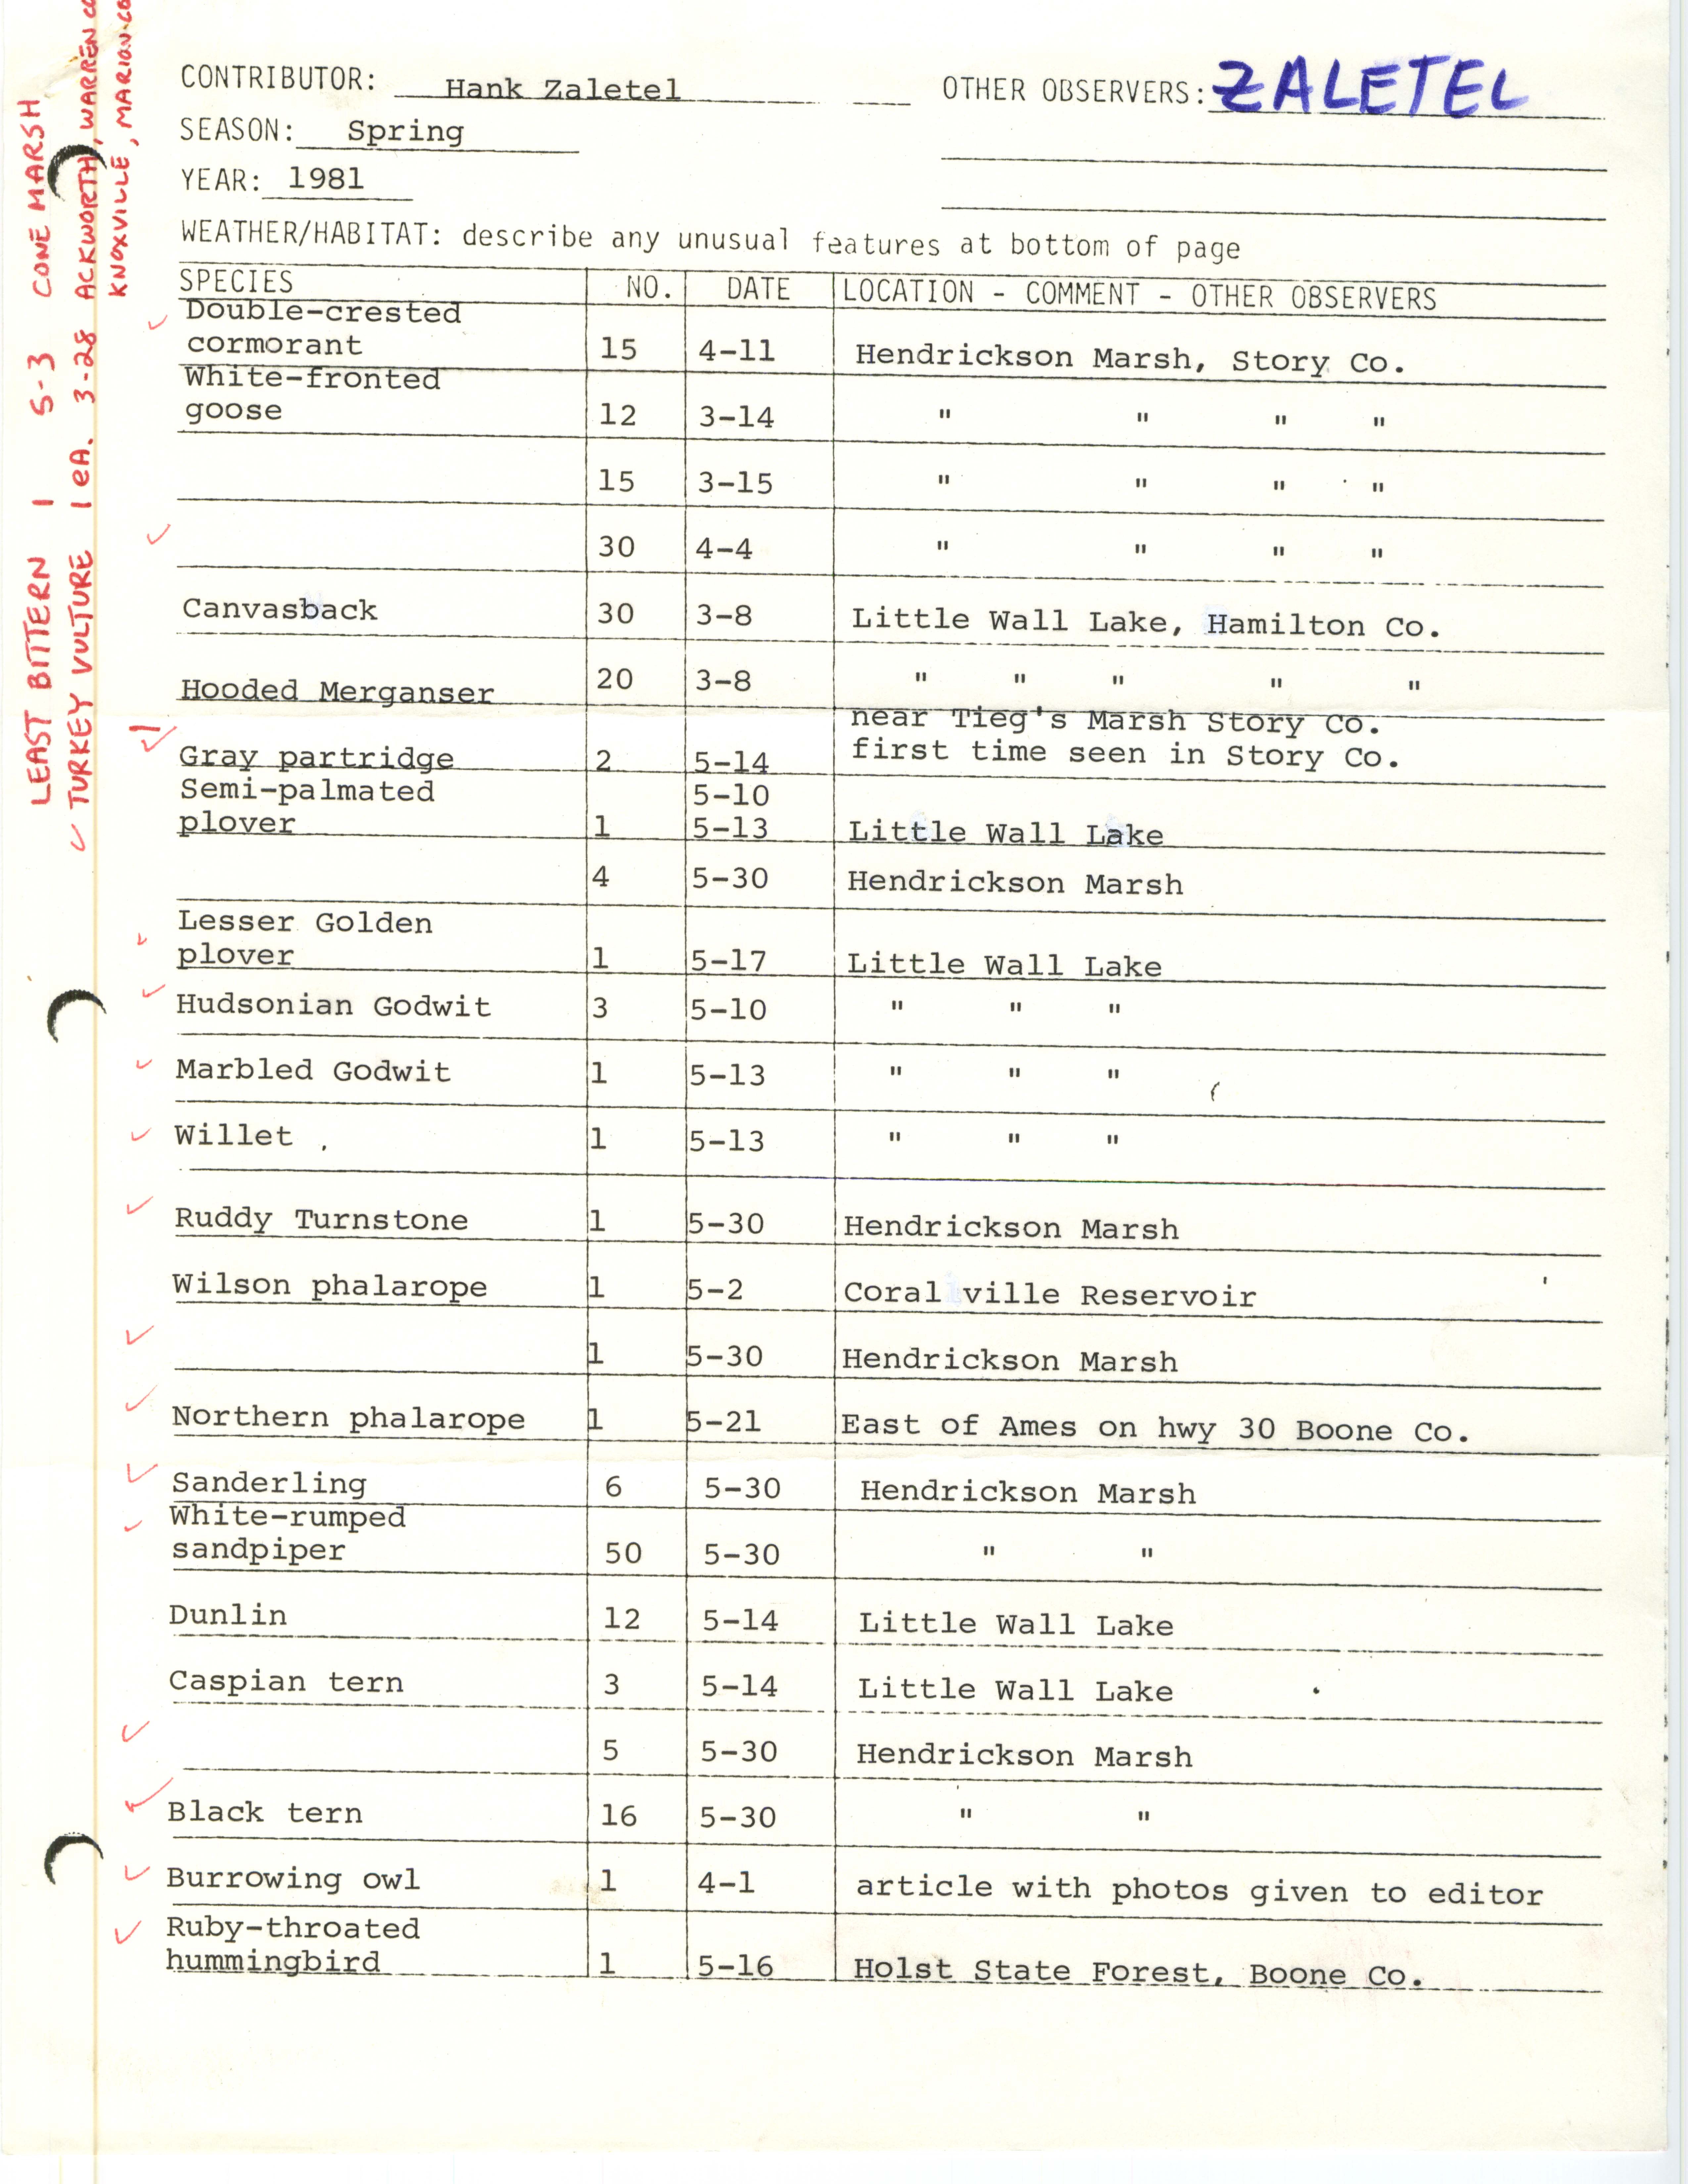 Annotated bird sighting list for spring 1981 compiled by Hank Zaletel